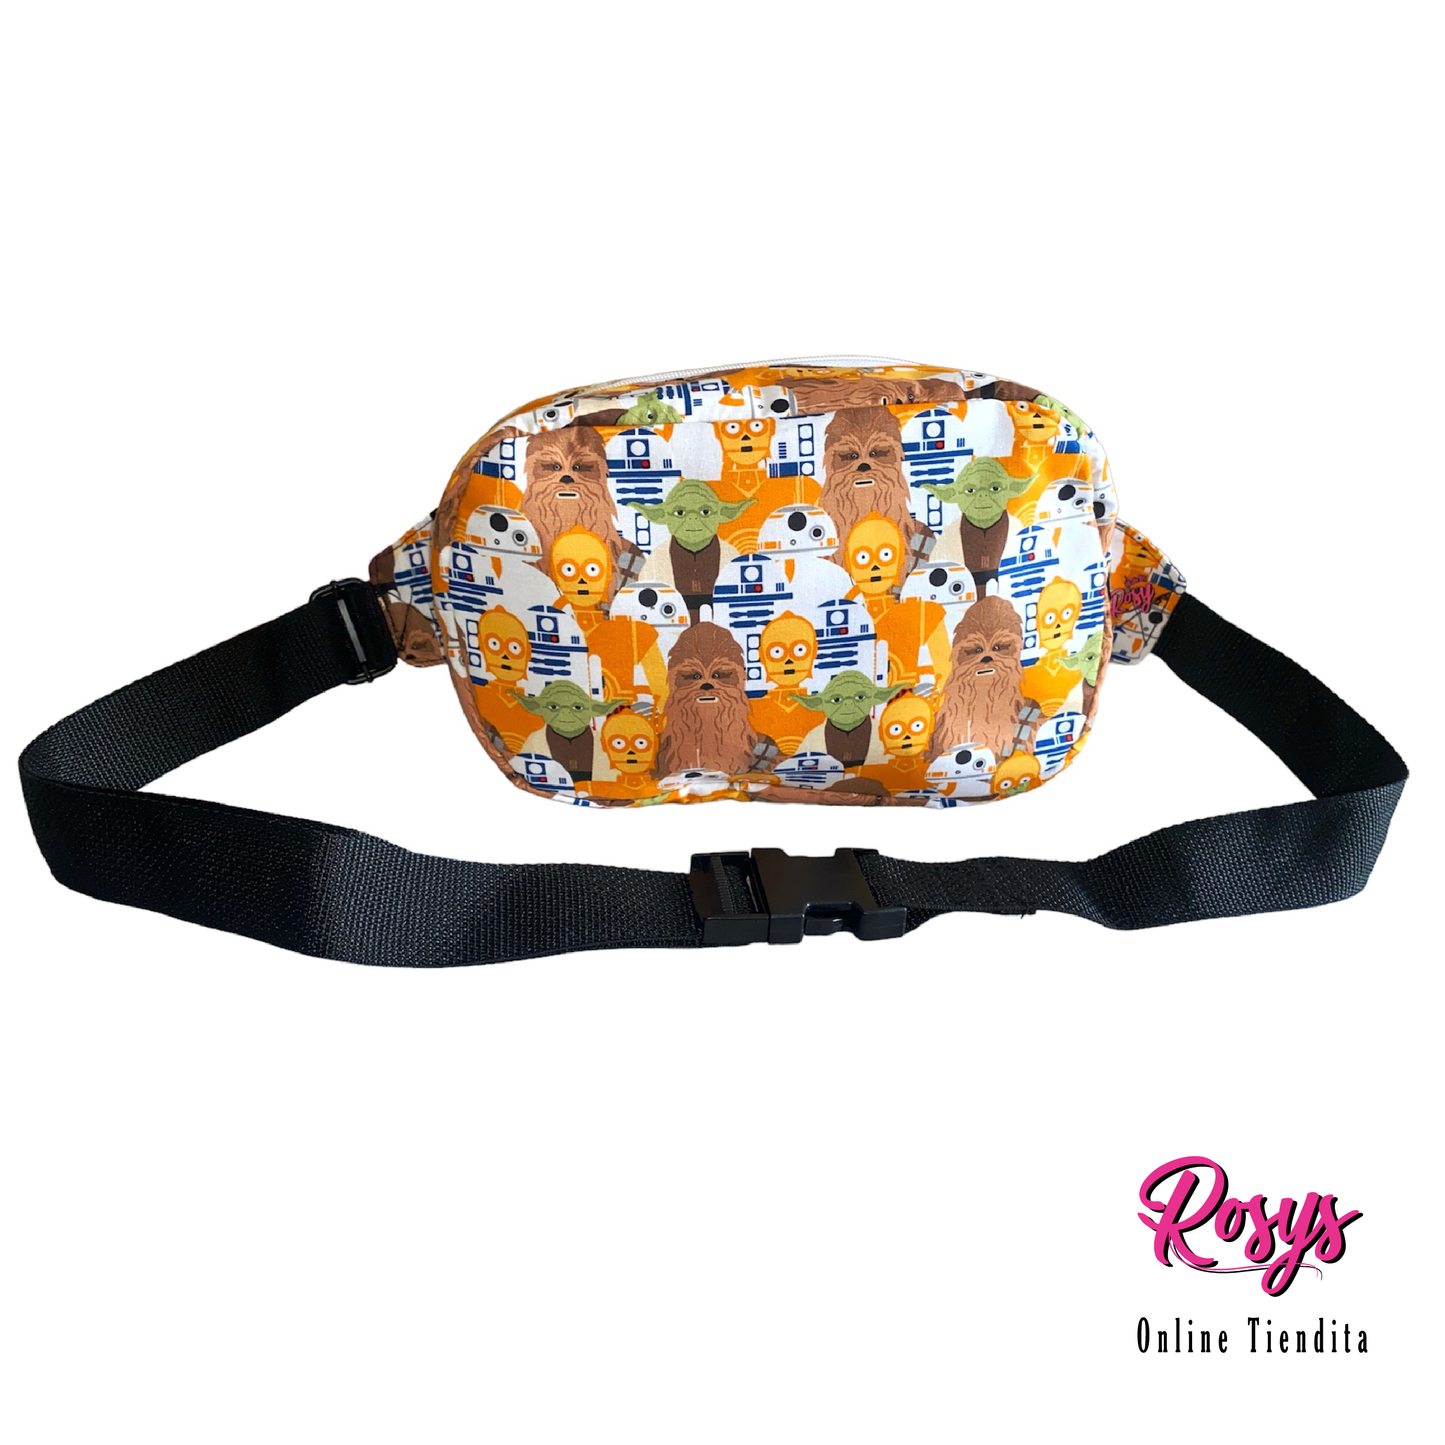 Star Wars Style Belt Bag | Made By Rosy!